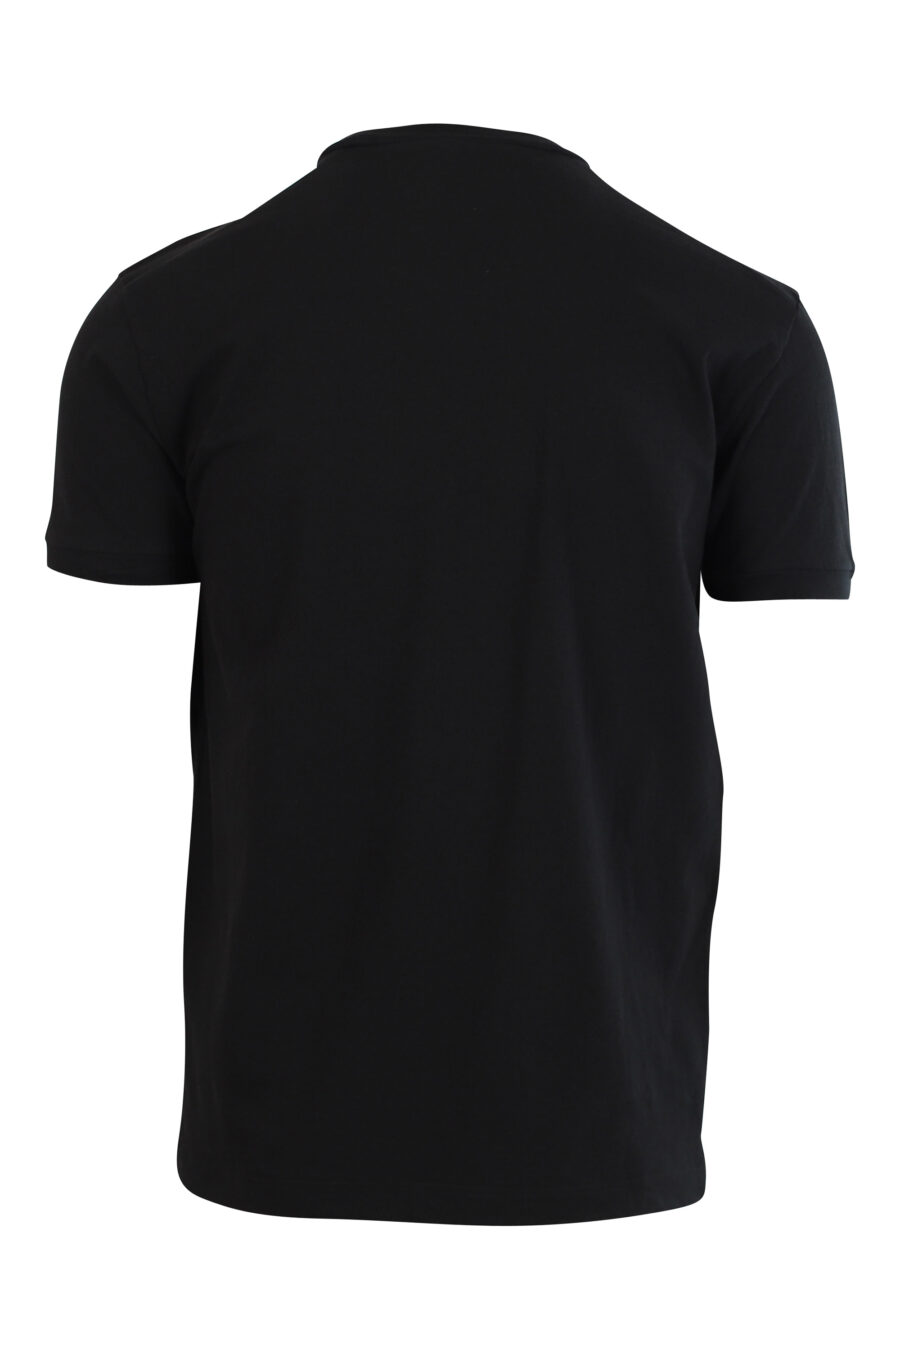 Black T-shirt with minilogue "dsquared2 milano" - 8058049836090 2